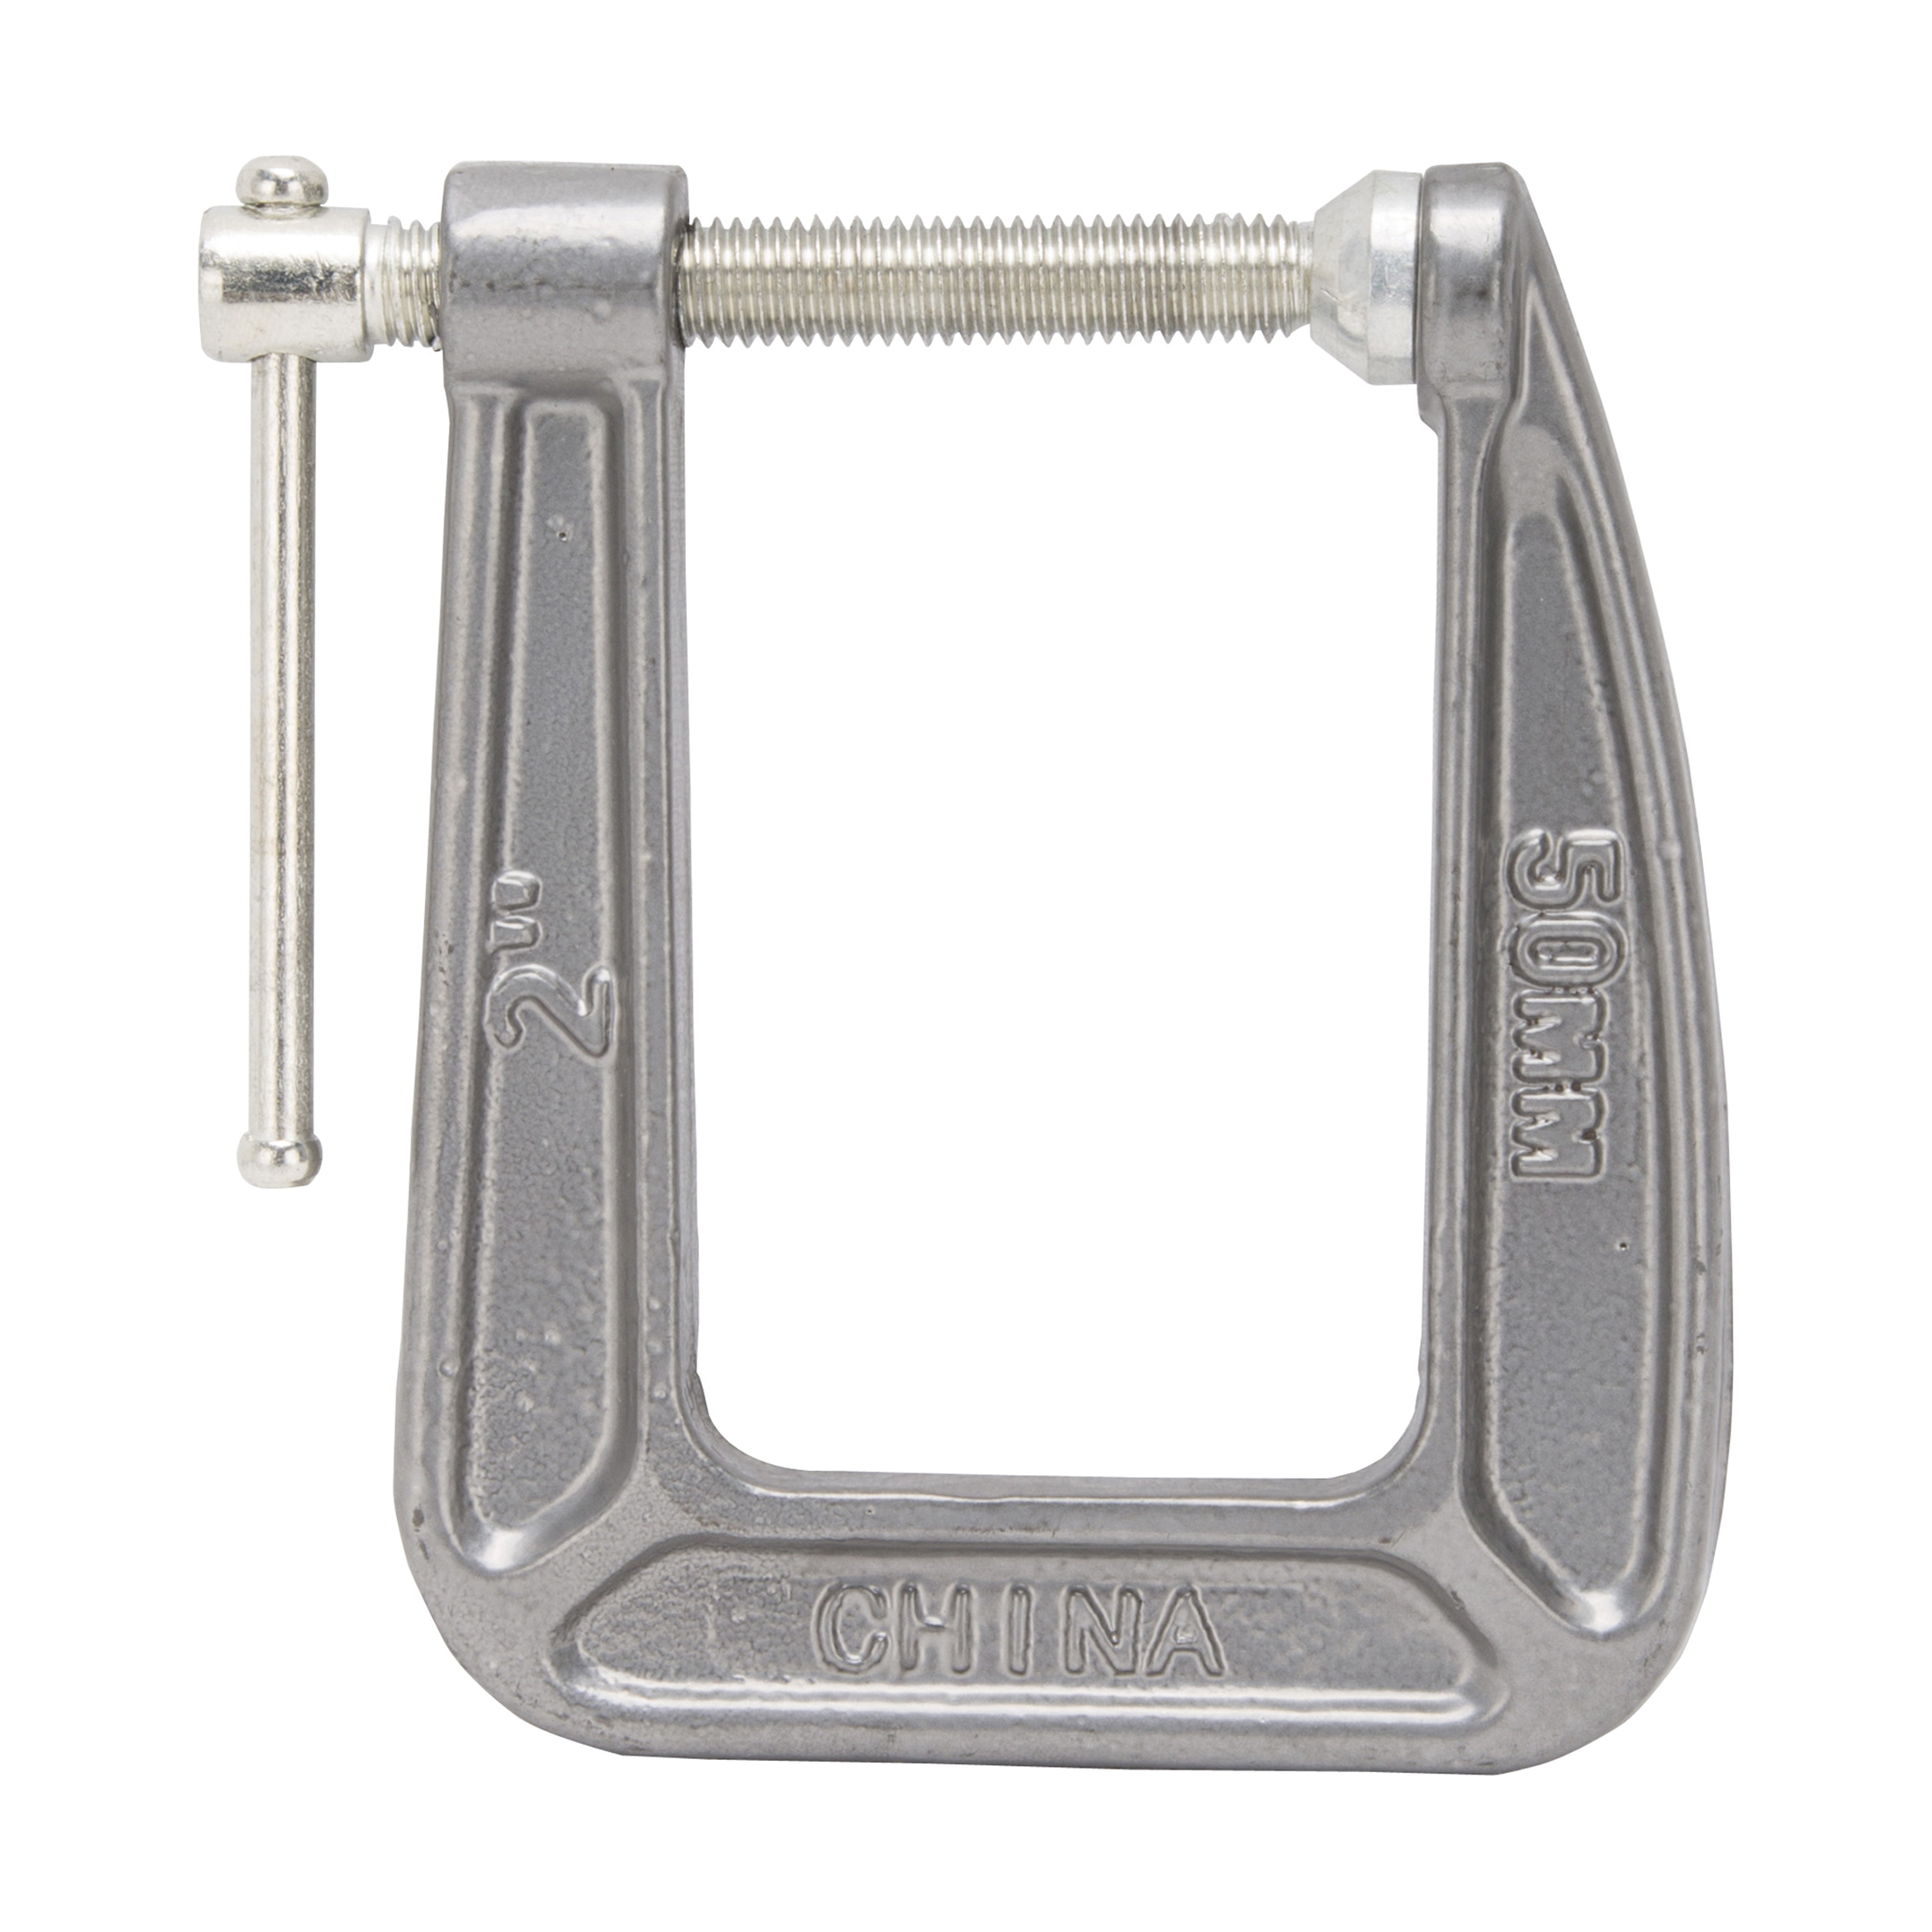 38-123 C-Clamp, 2 in Max Opening Size, 3-1/5 in D Throat, Steel Body, Gray Body